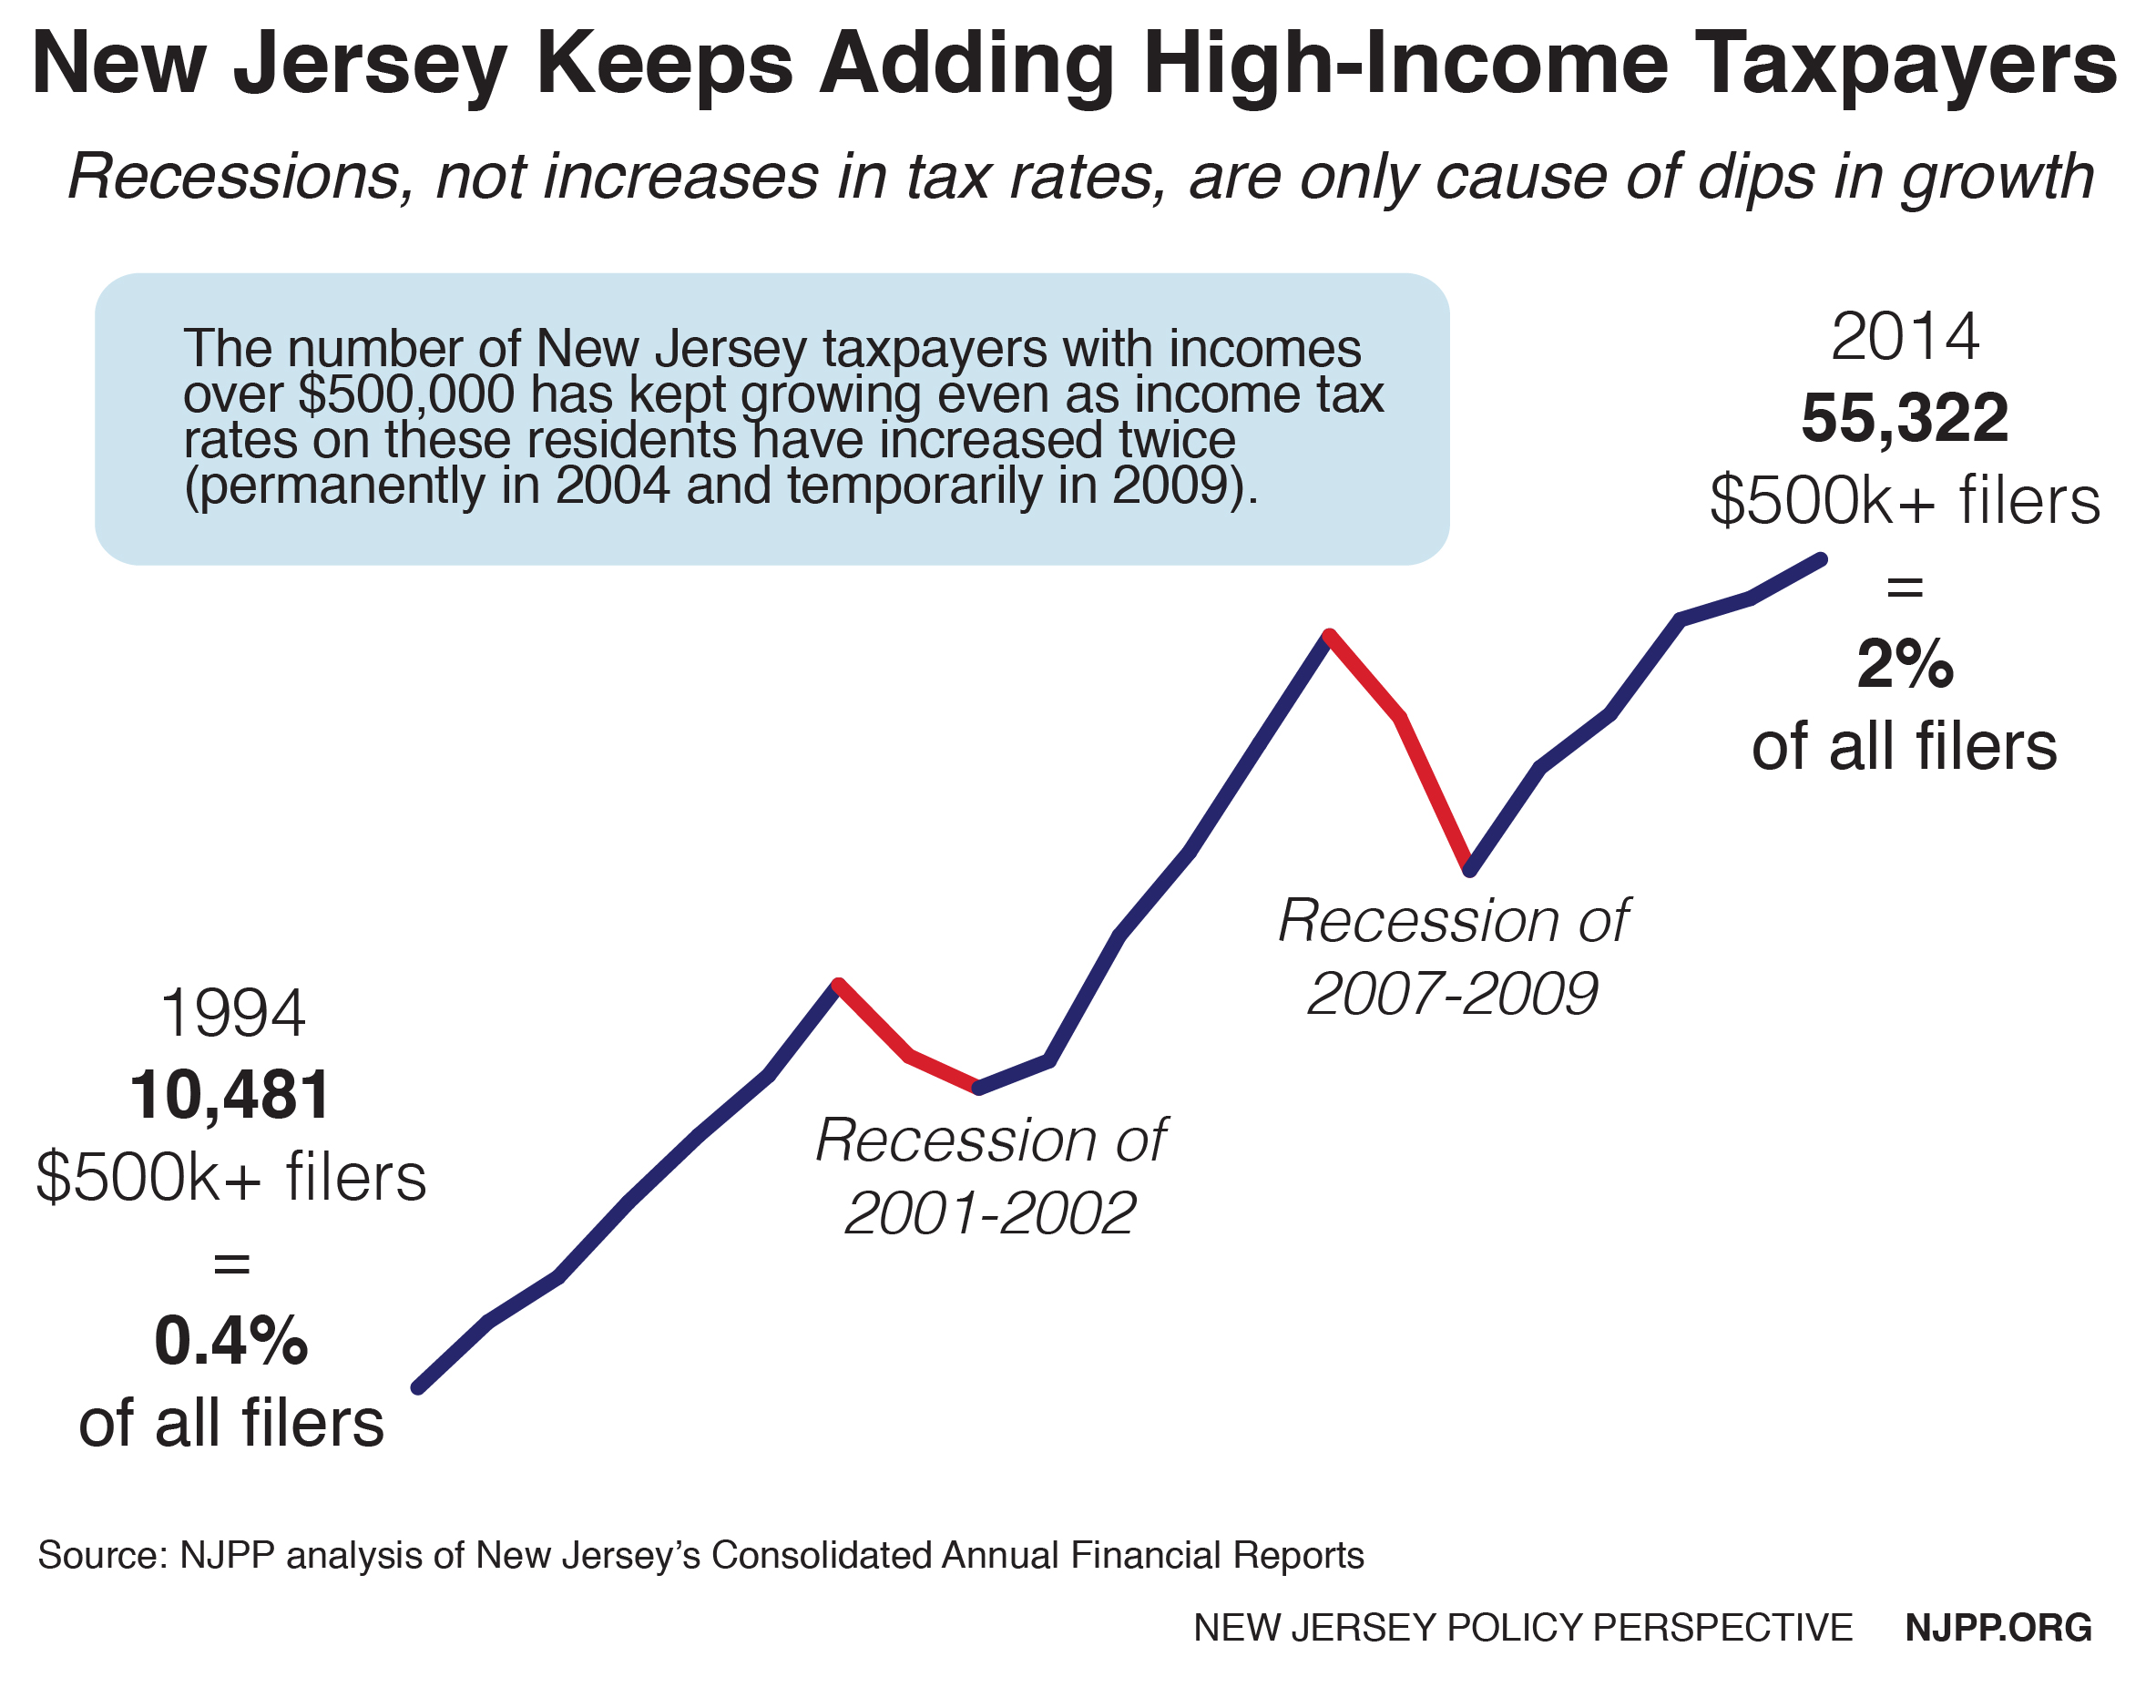 Reforming New Jersey's Income Tax Would 